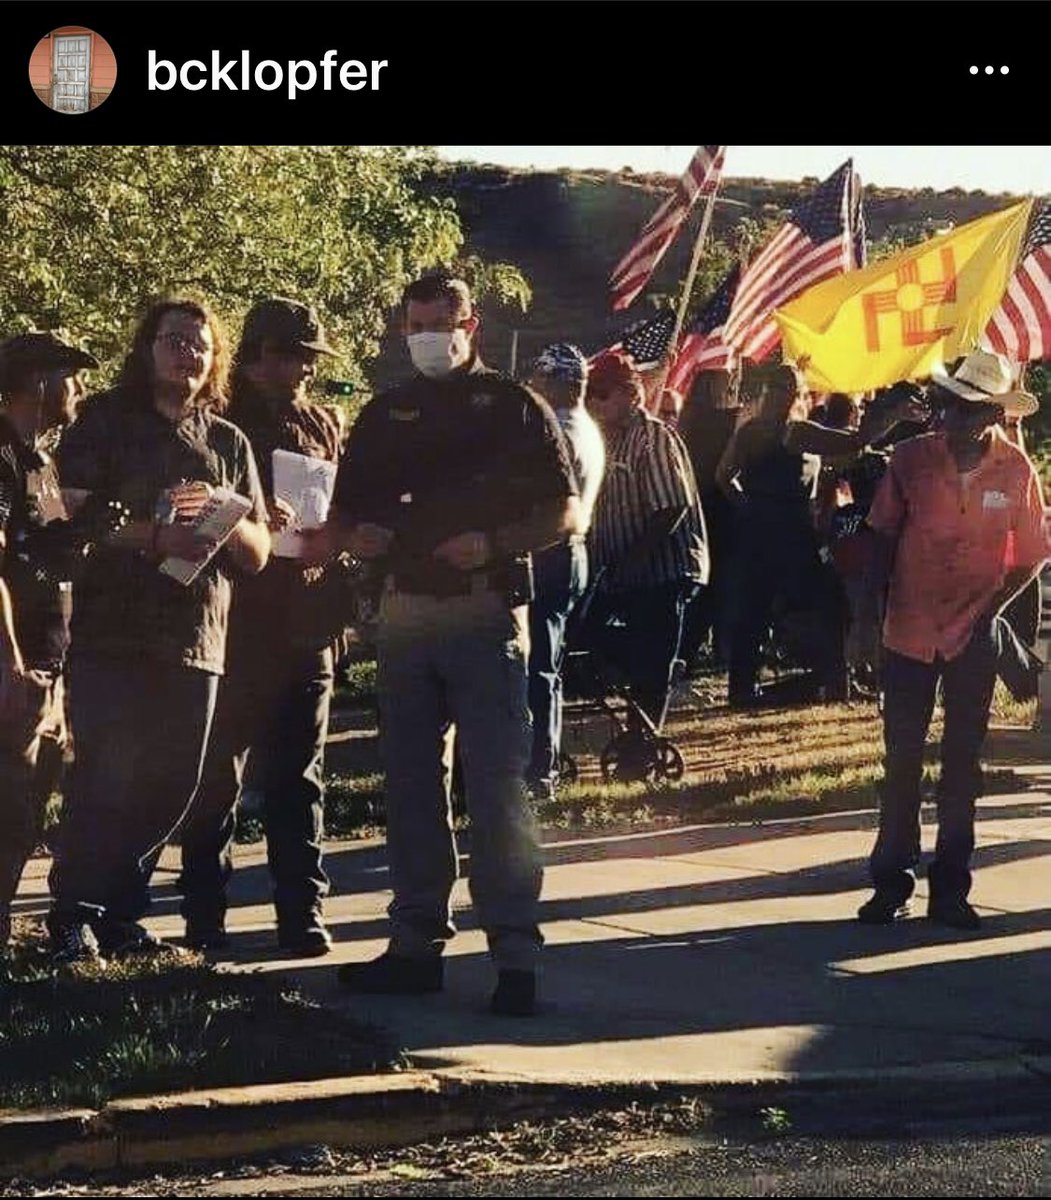 Sorry for the misspellings. I just finished a run and found all these hateful images on my phone. The cop (the only one wearing a mask) in this picture is San Juan County Sheriff Shane Farrari.